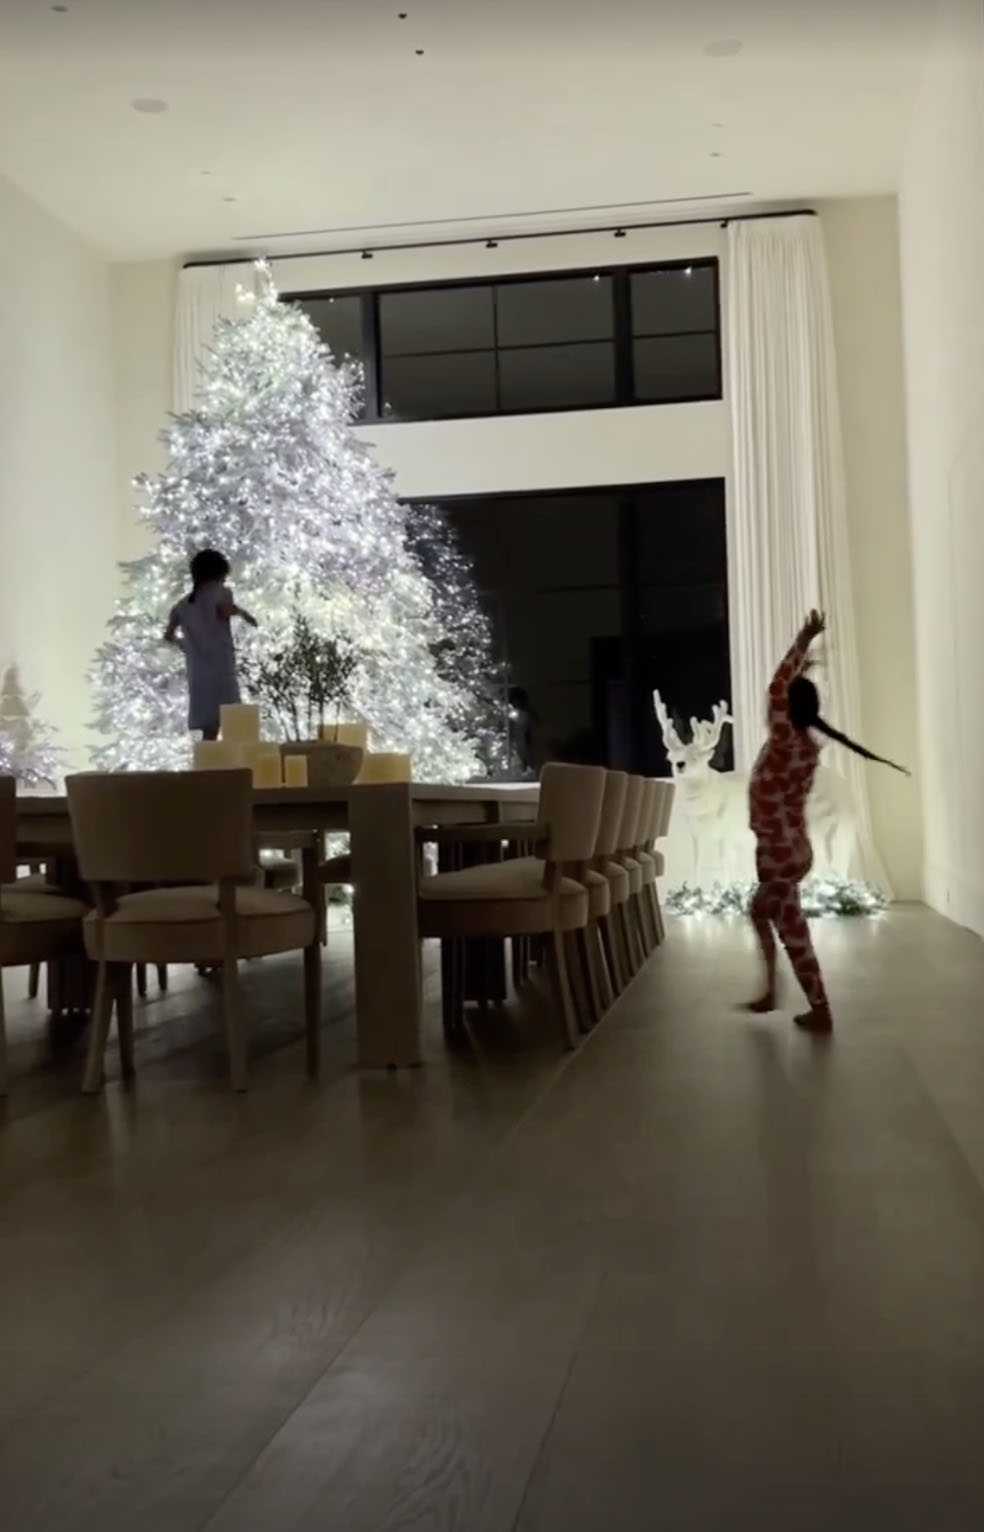 Khloe Kardashian shows off lavish Christmas dining room decor in new video with daughter True, 4, & niece Dream, 6